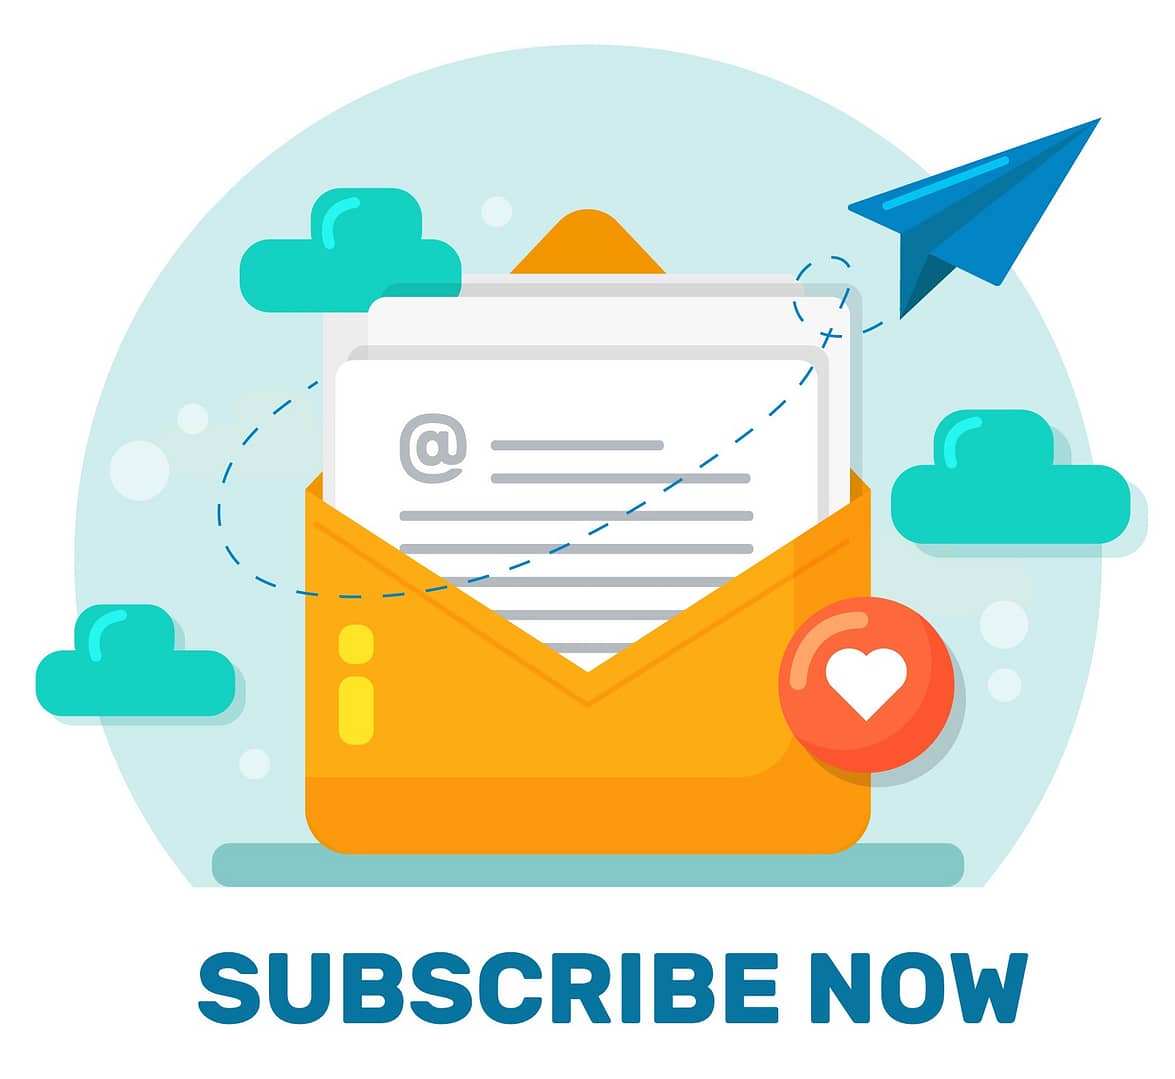 subscribe-now-illustration